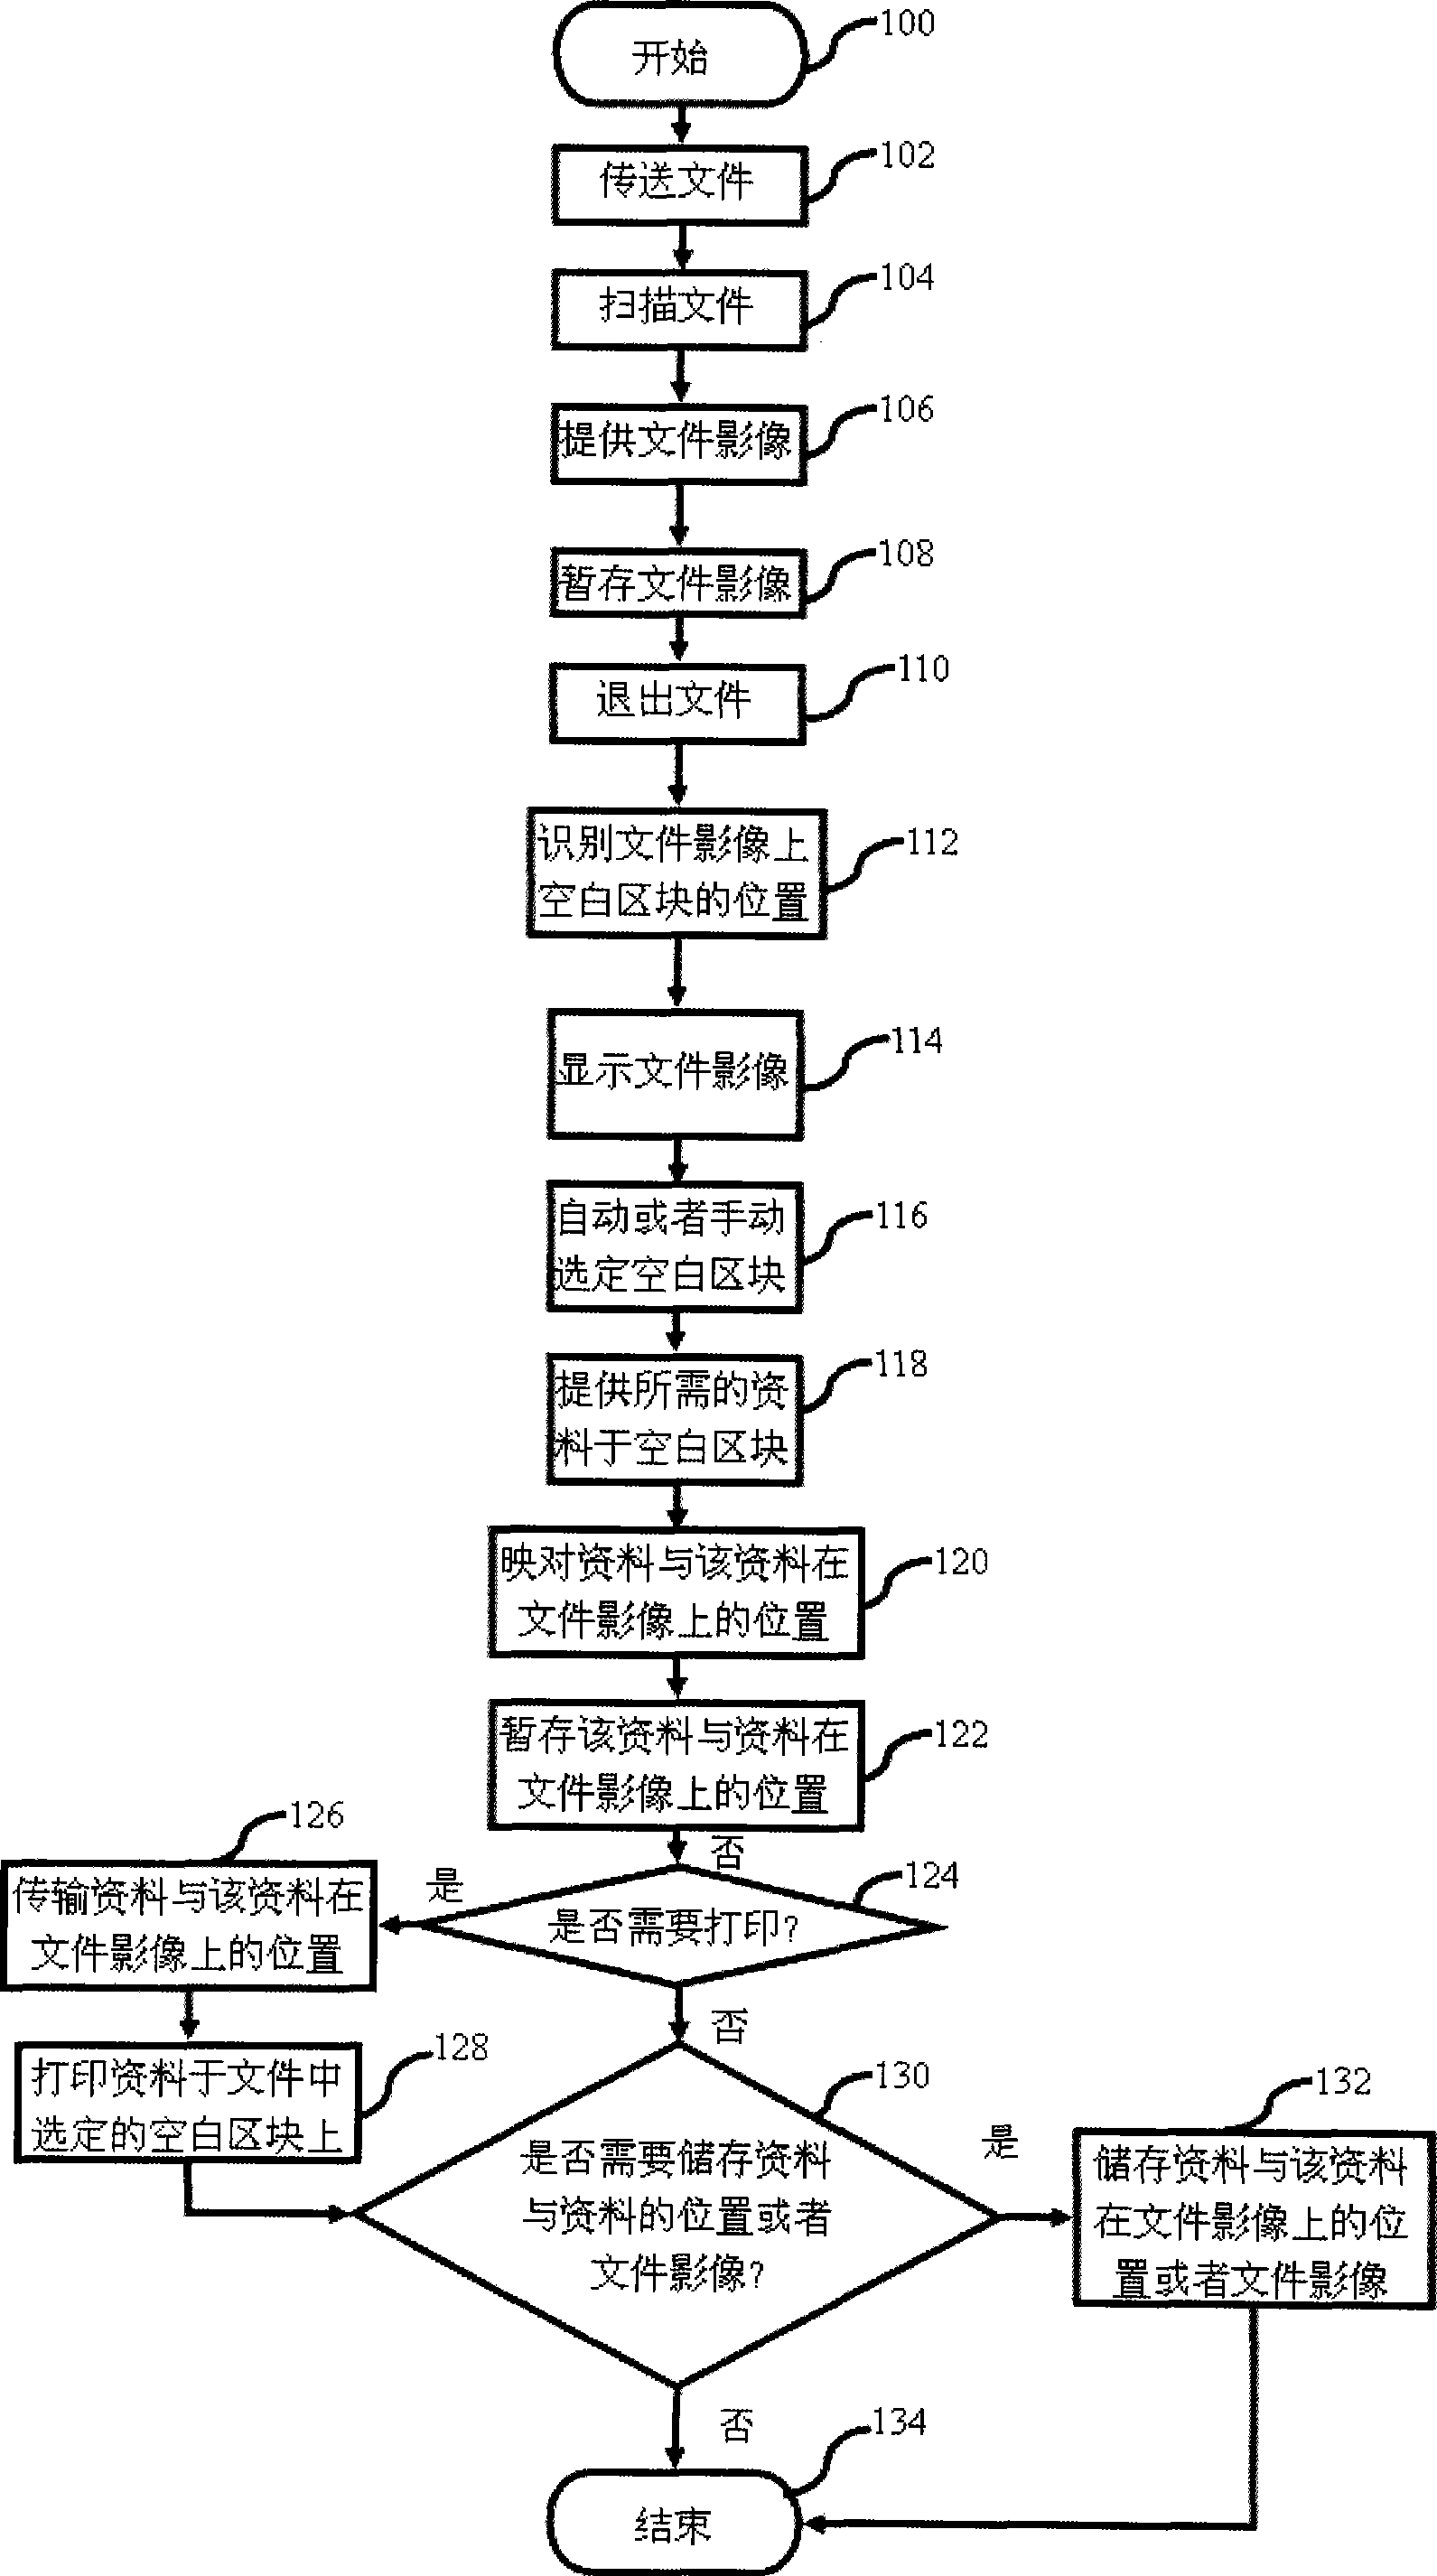 Method and device for combining data with files